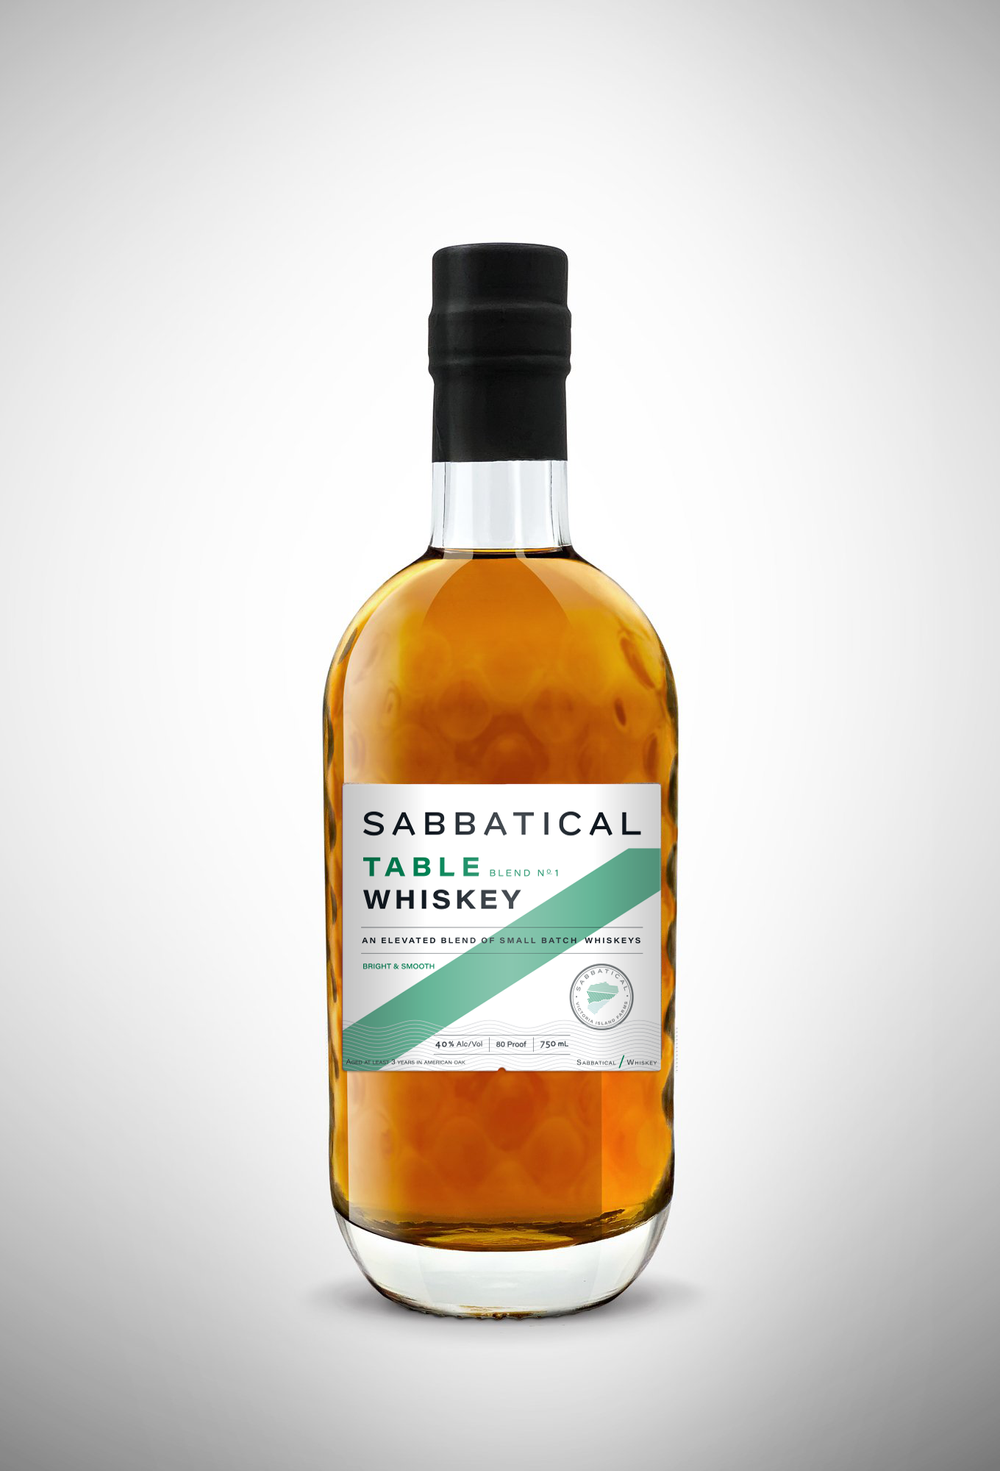 Blended Whiskey, Table No. 1 — Sabbatical